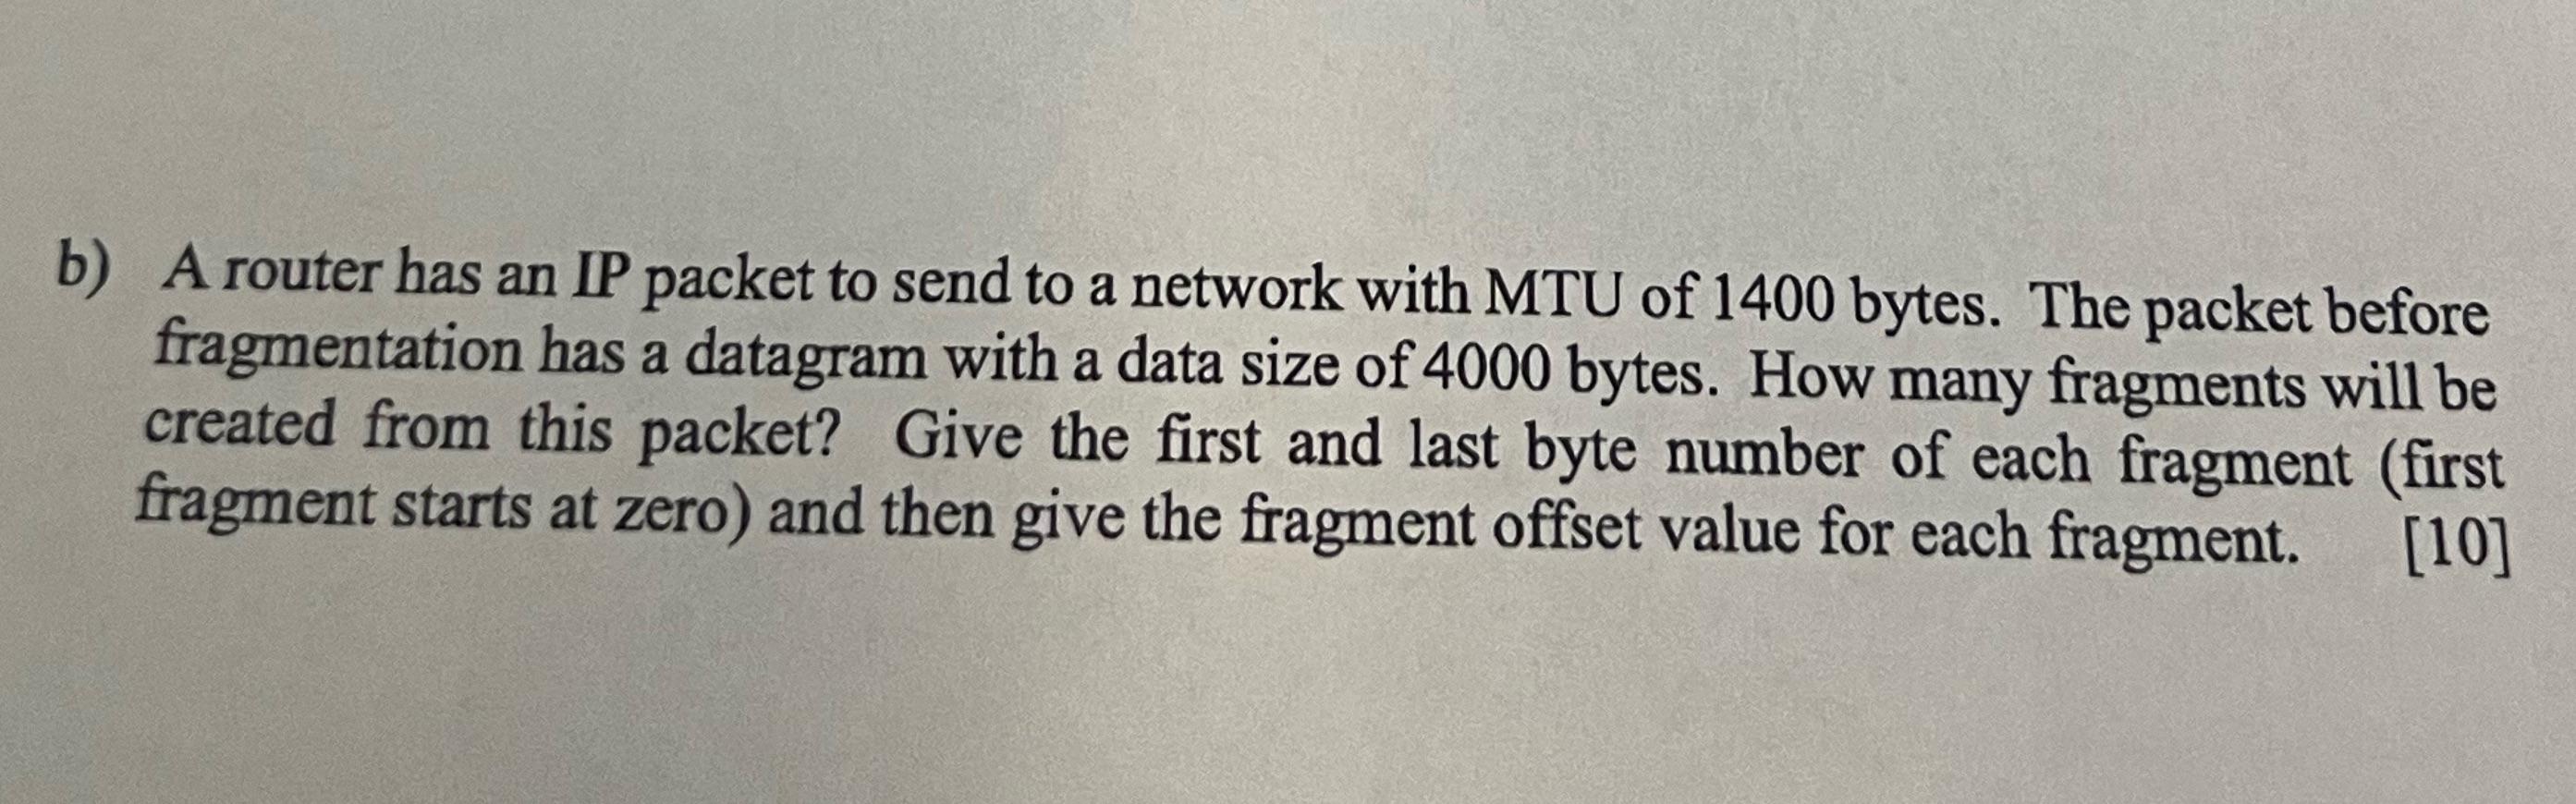 b) A router has an IP packet to send to a network with MTU of 1400 bytes. The packet before fragmentation has